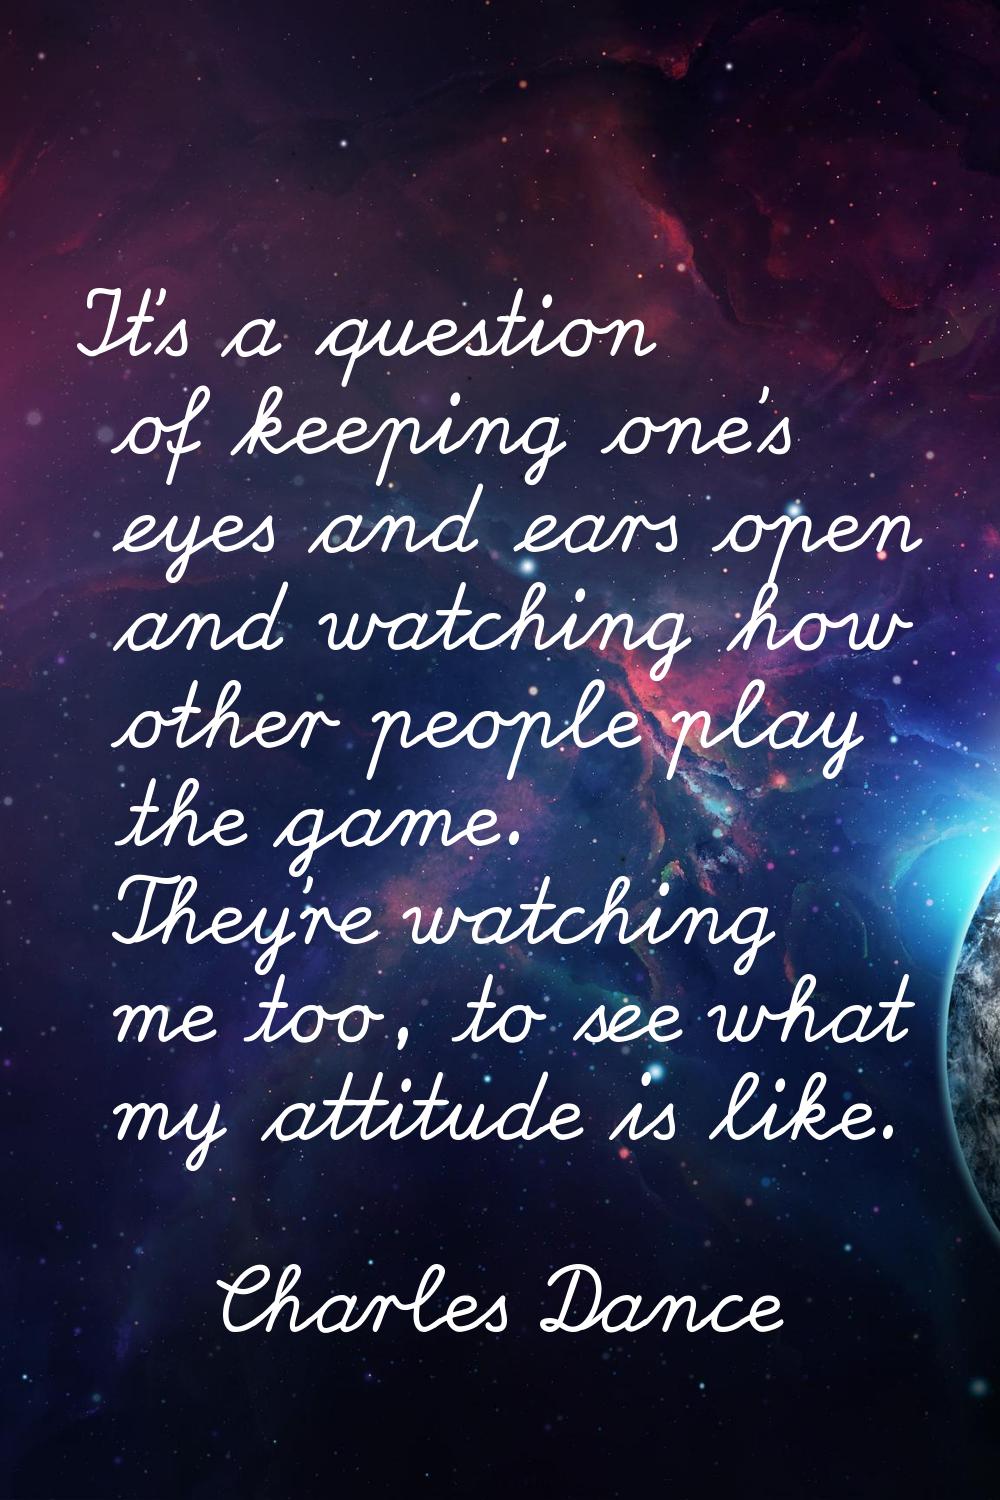 It's a question of keeping one's eyes and ears open and watching how other people play the game. Th